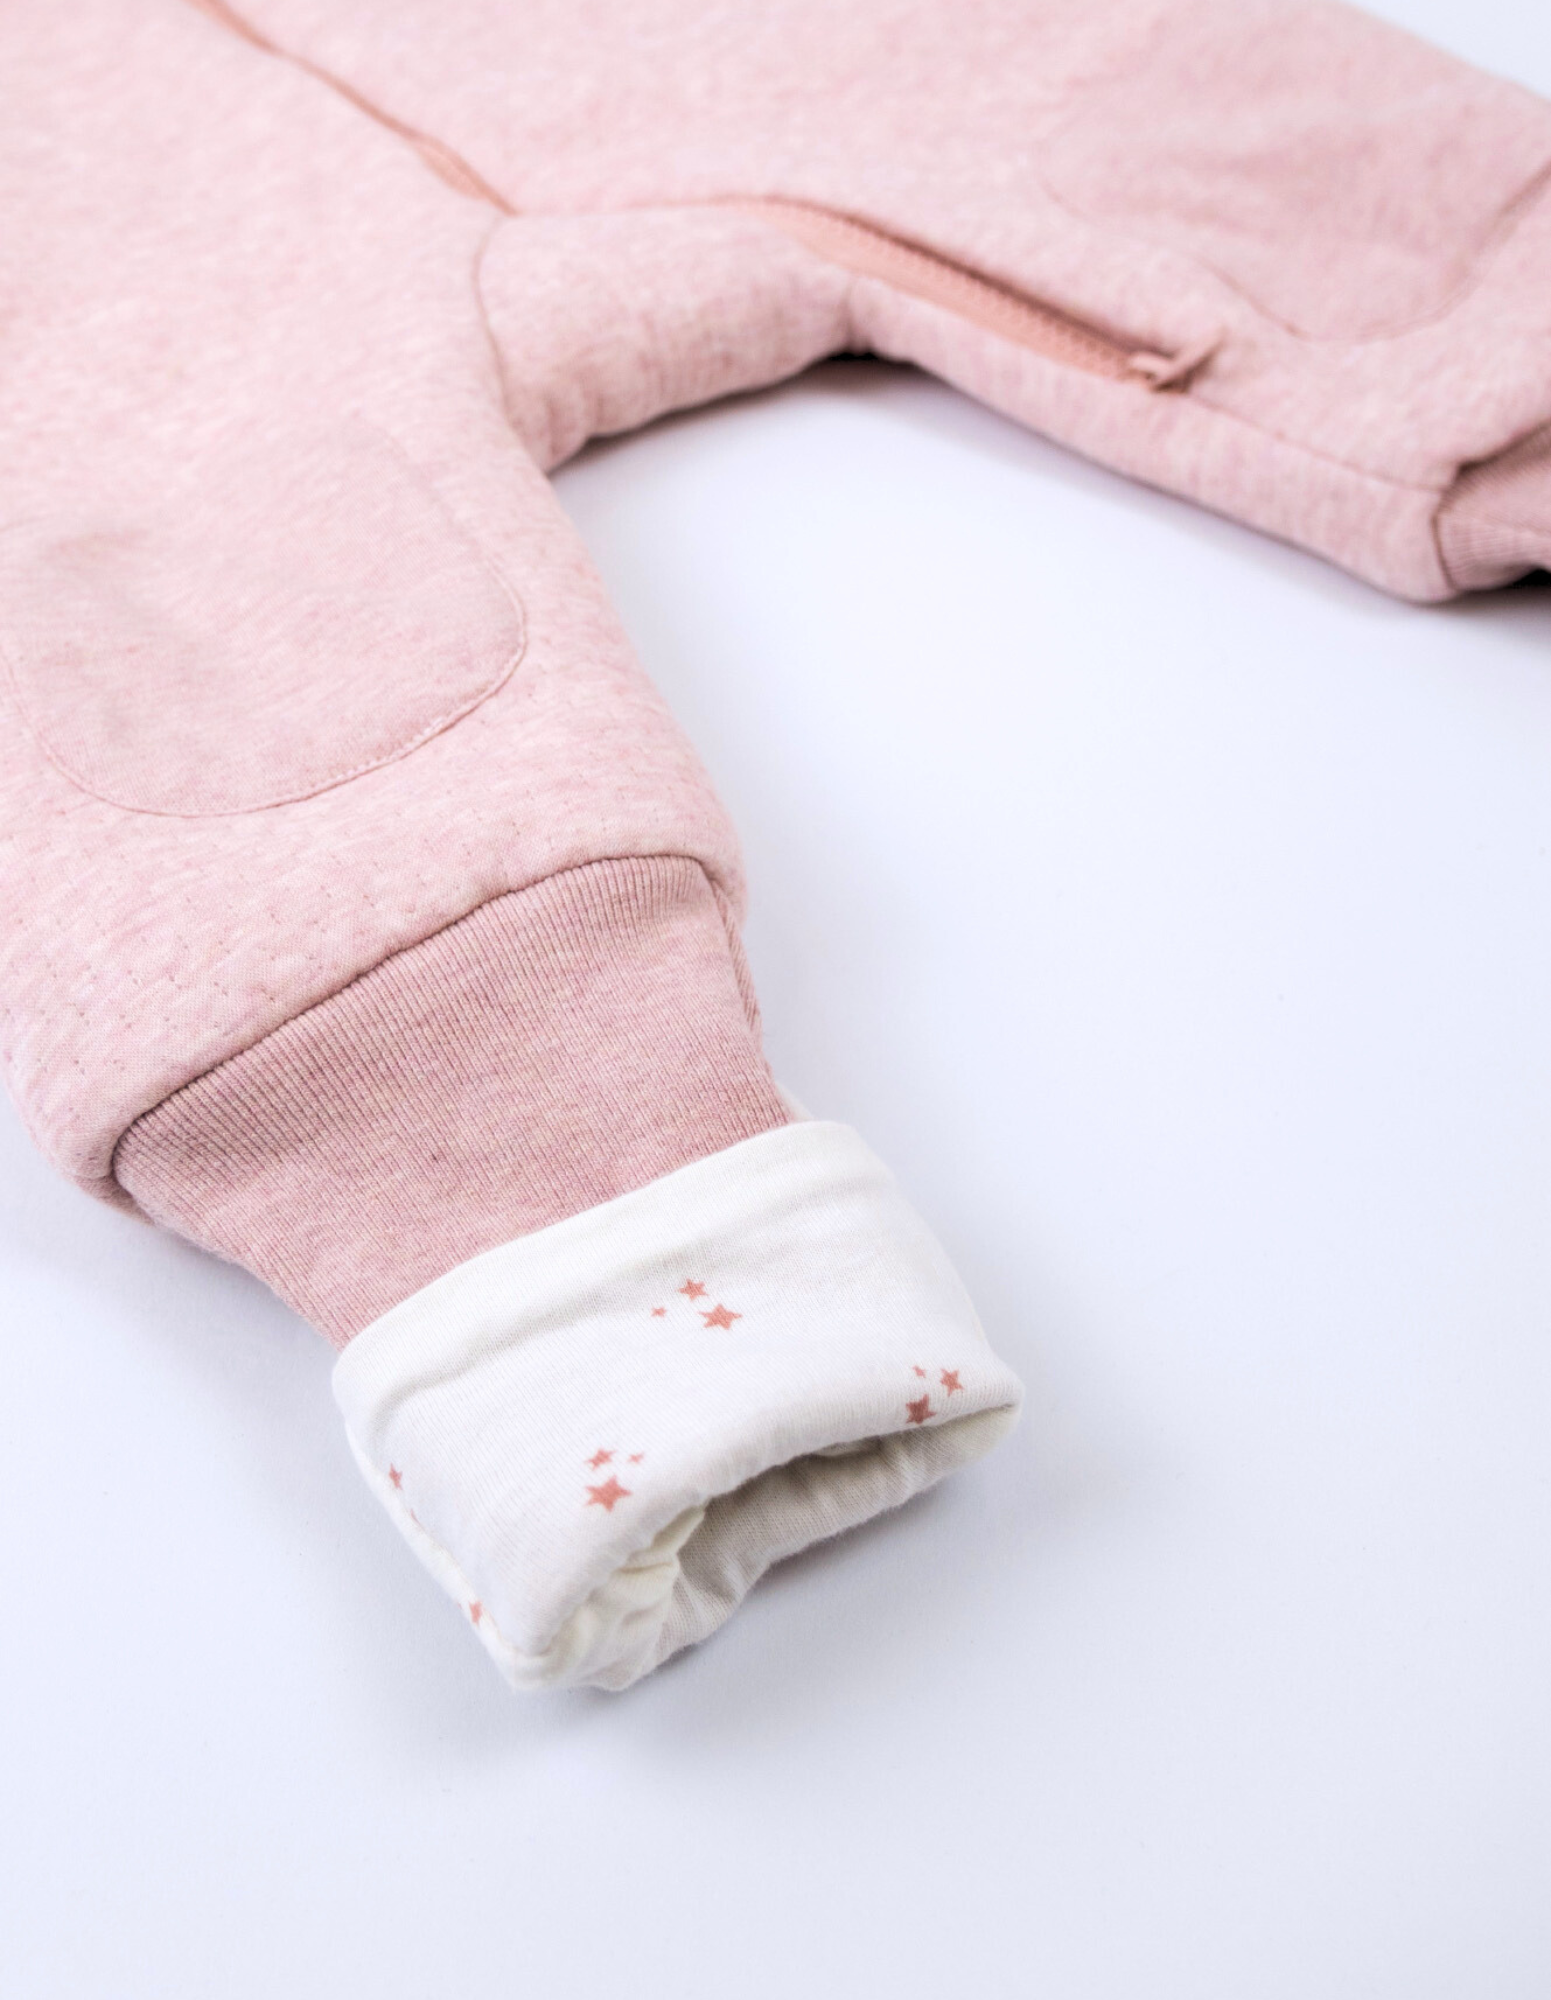 warmies cotton sleeveless sleeping bag with legs 2.5 TOG - dusty pink/pink stars